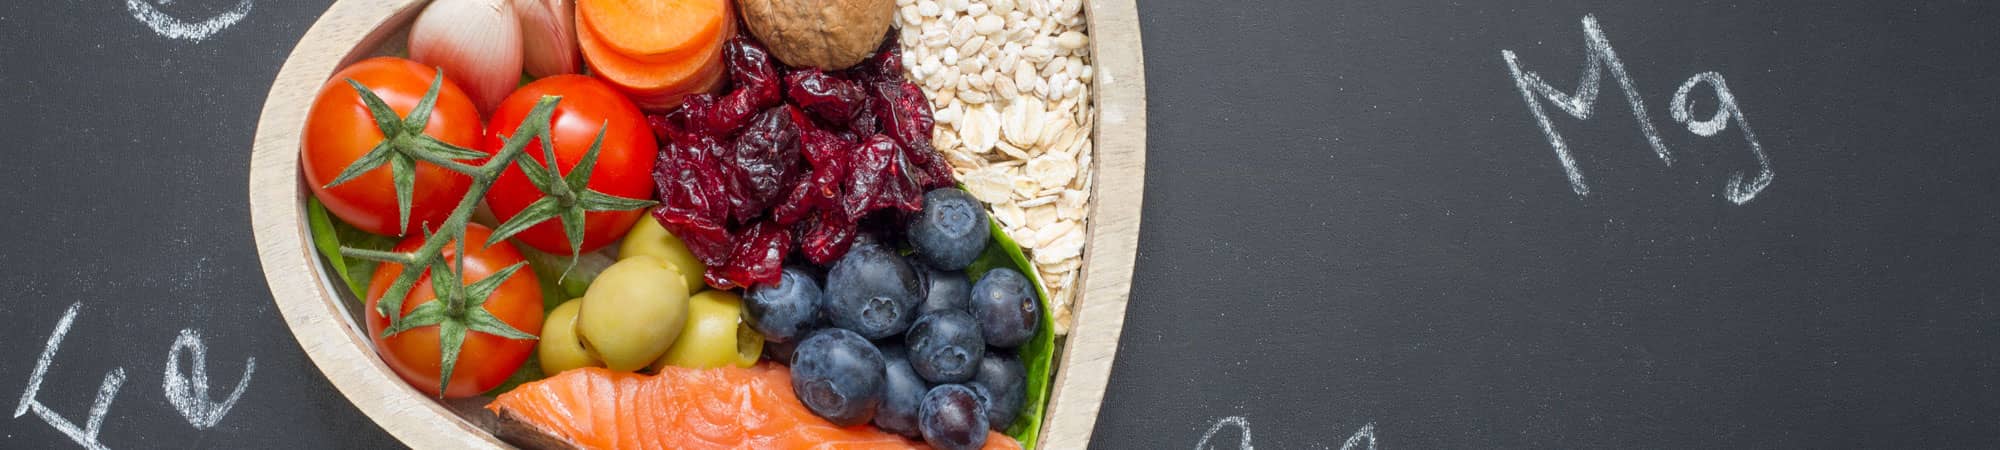 Bowl of healthy fruits, vegetables and seeds